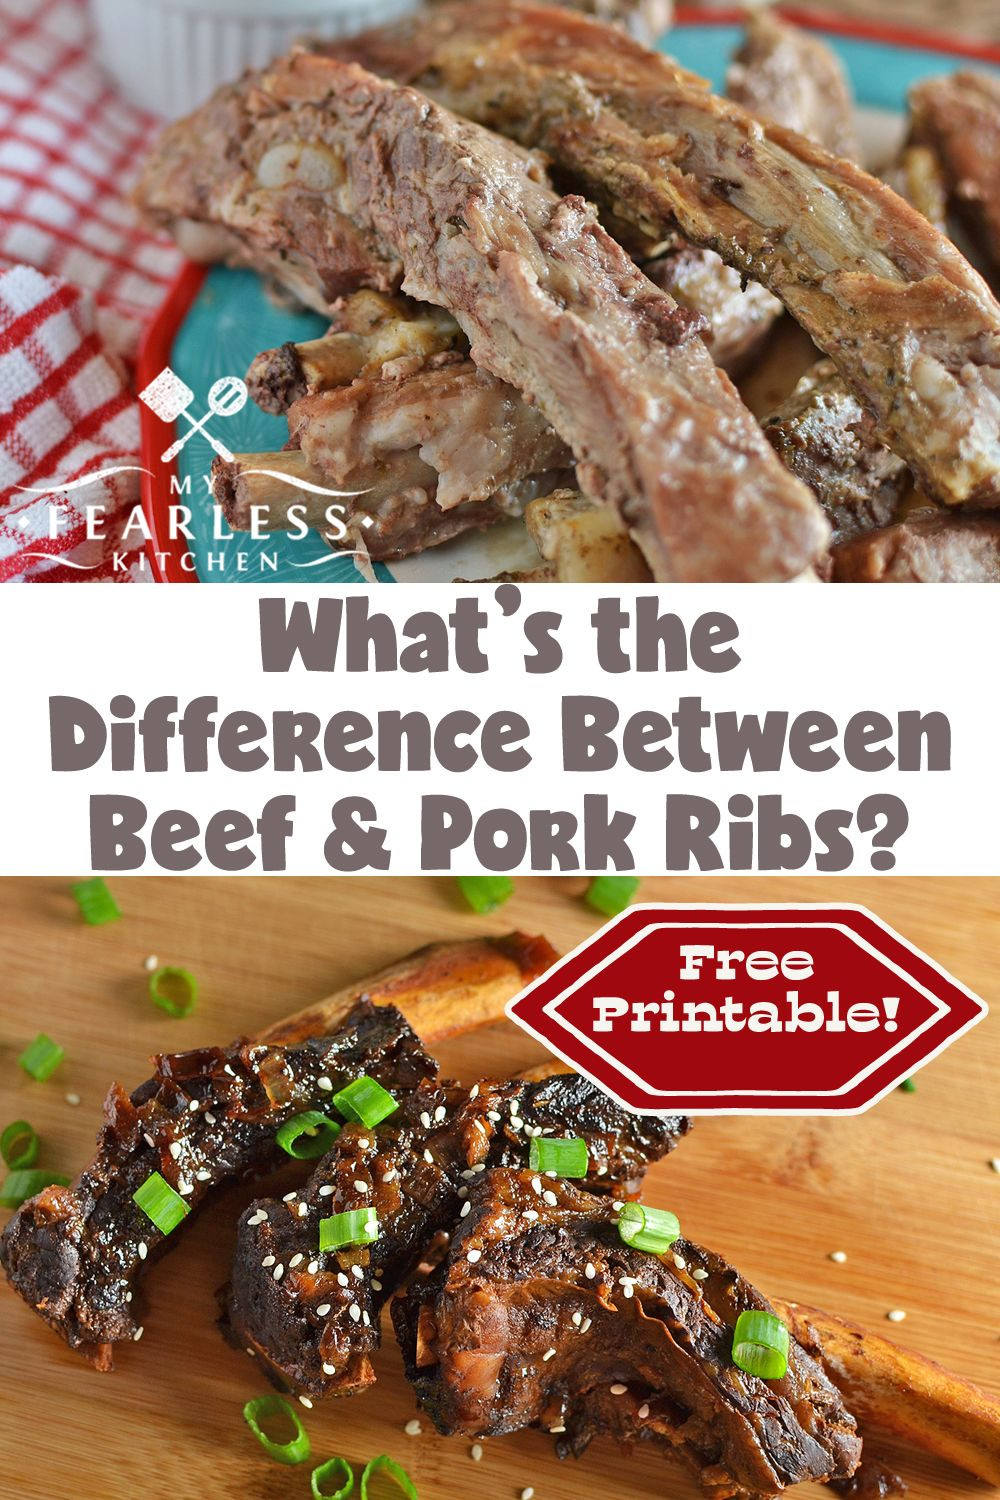 Beef Or Pork Ribs
 What s the Difference Between Beef & Pork Ribs from My